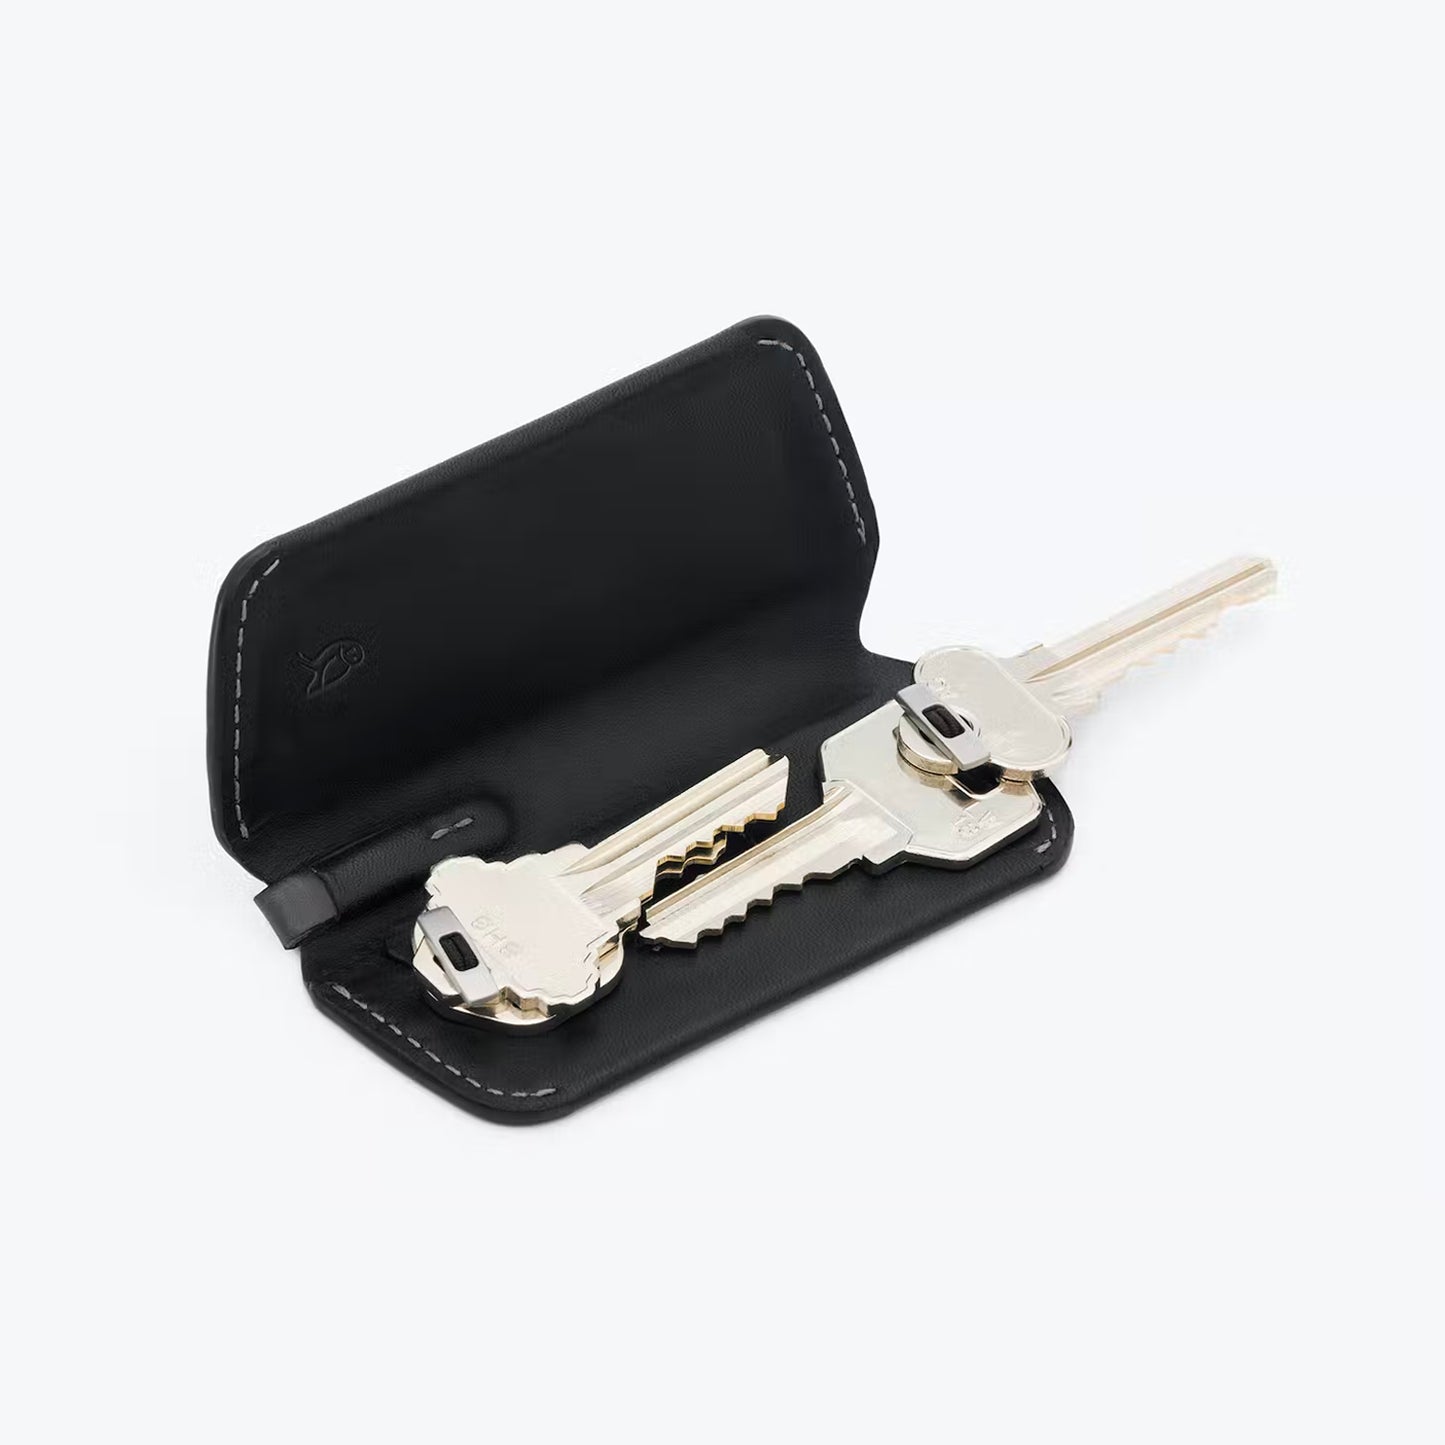 Bellroy - Key Cover Plus (2nd Edition) - Black